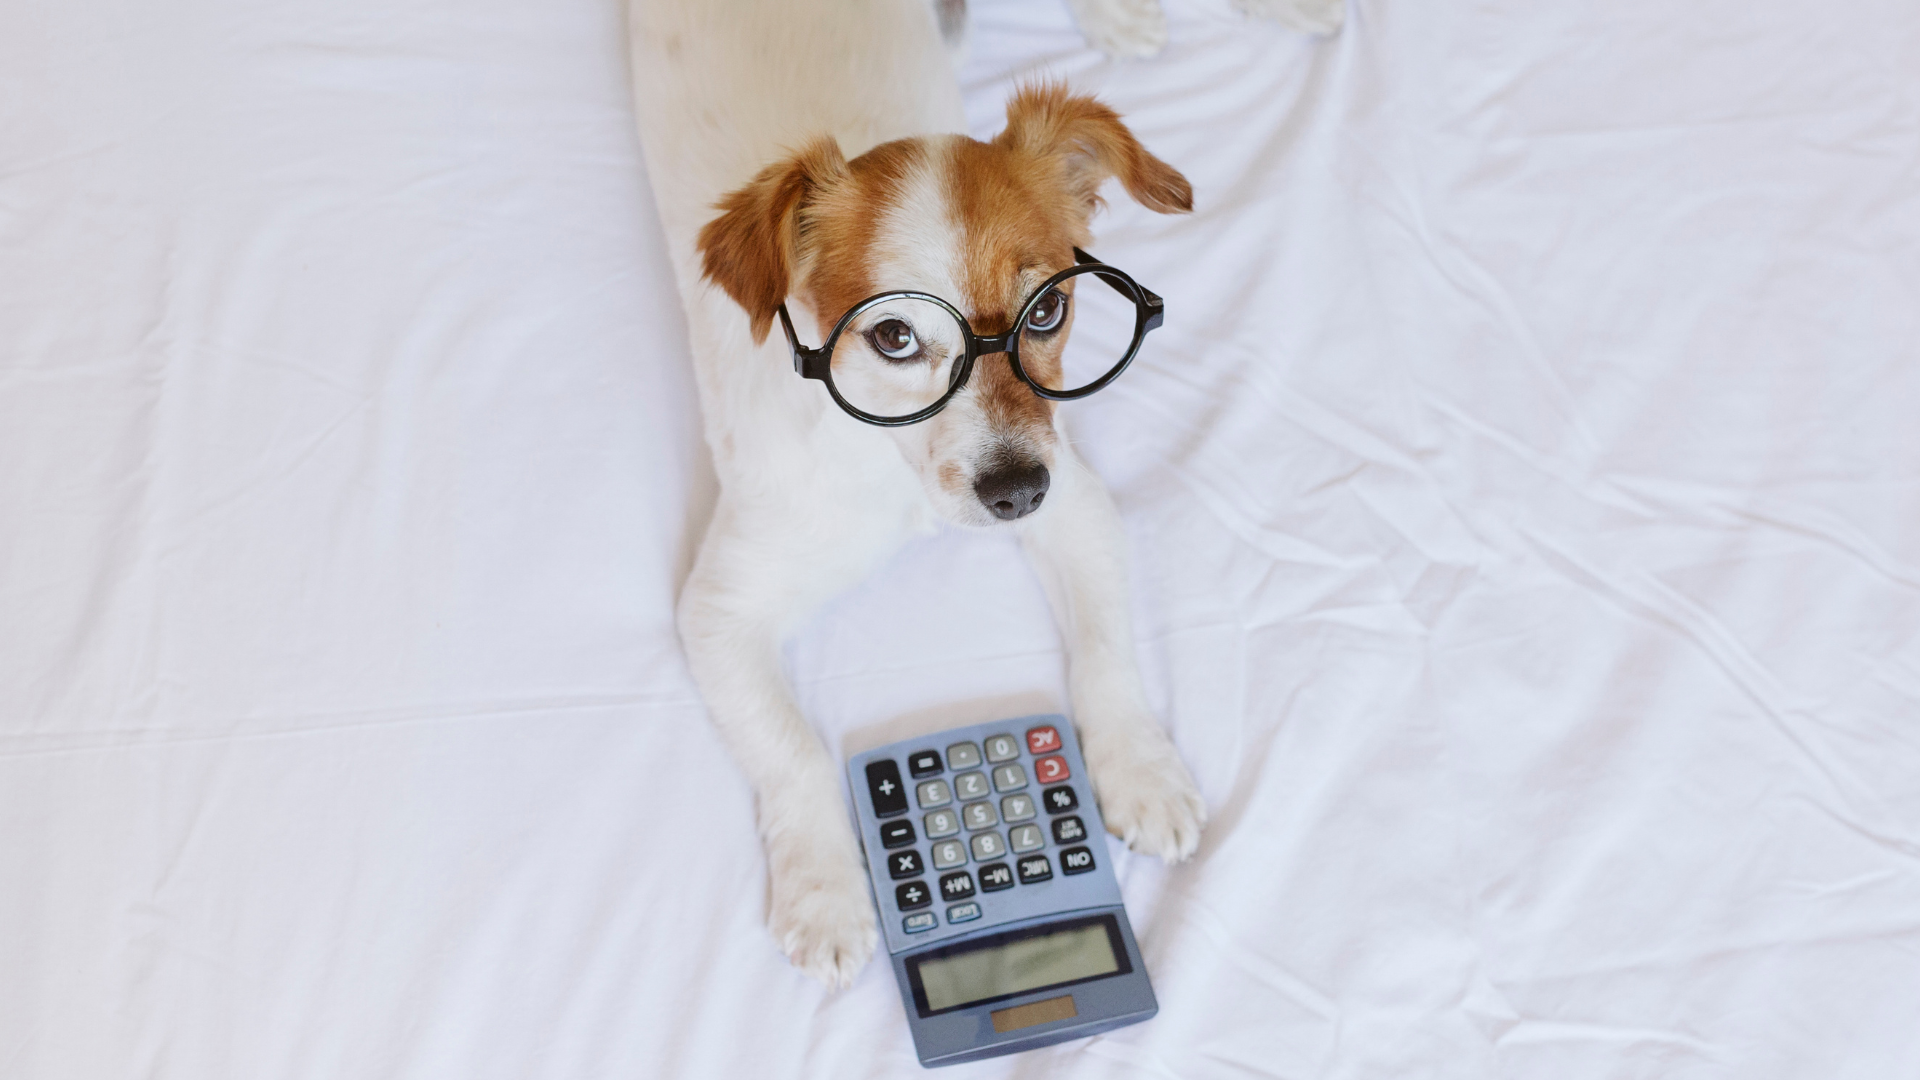 Calculate the start up costs for your dog walking business.